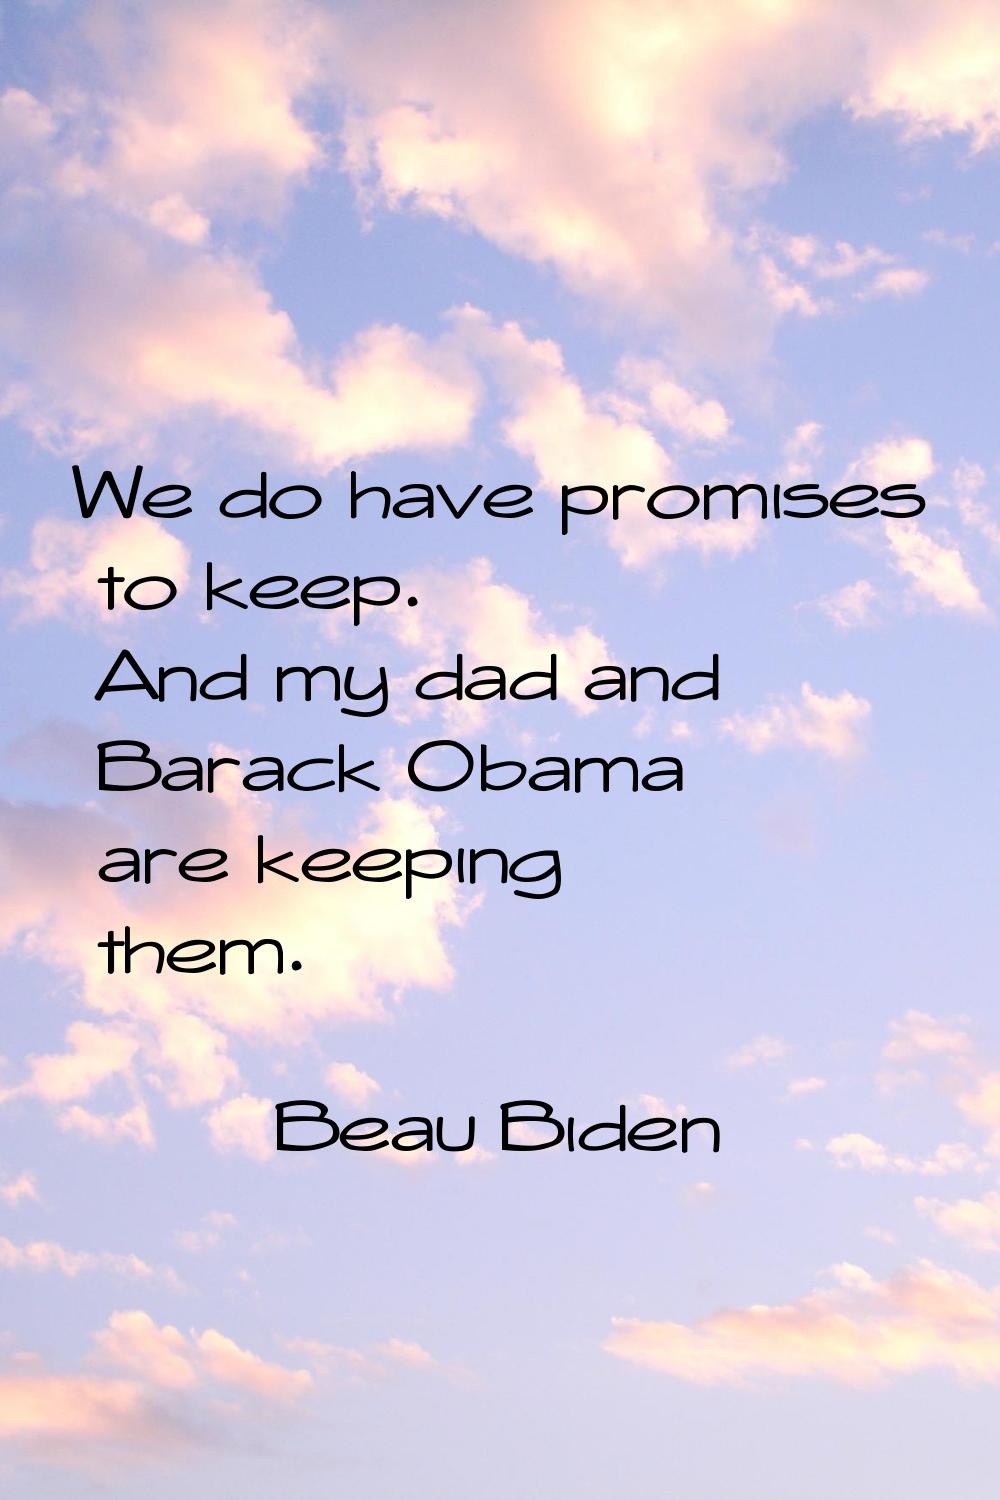 We do have promises to keep. And my dad and Barack Obama are keeping them.